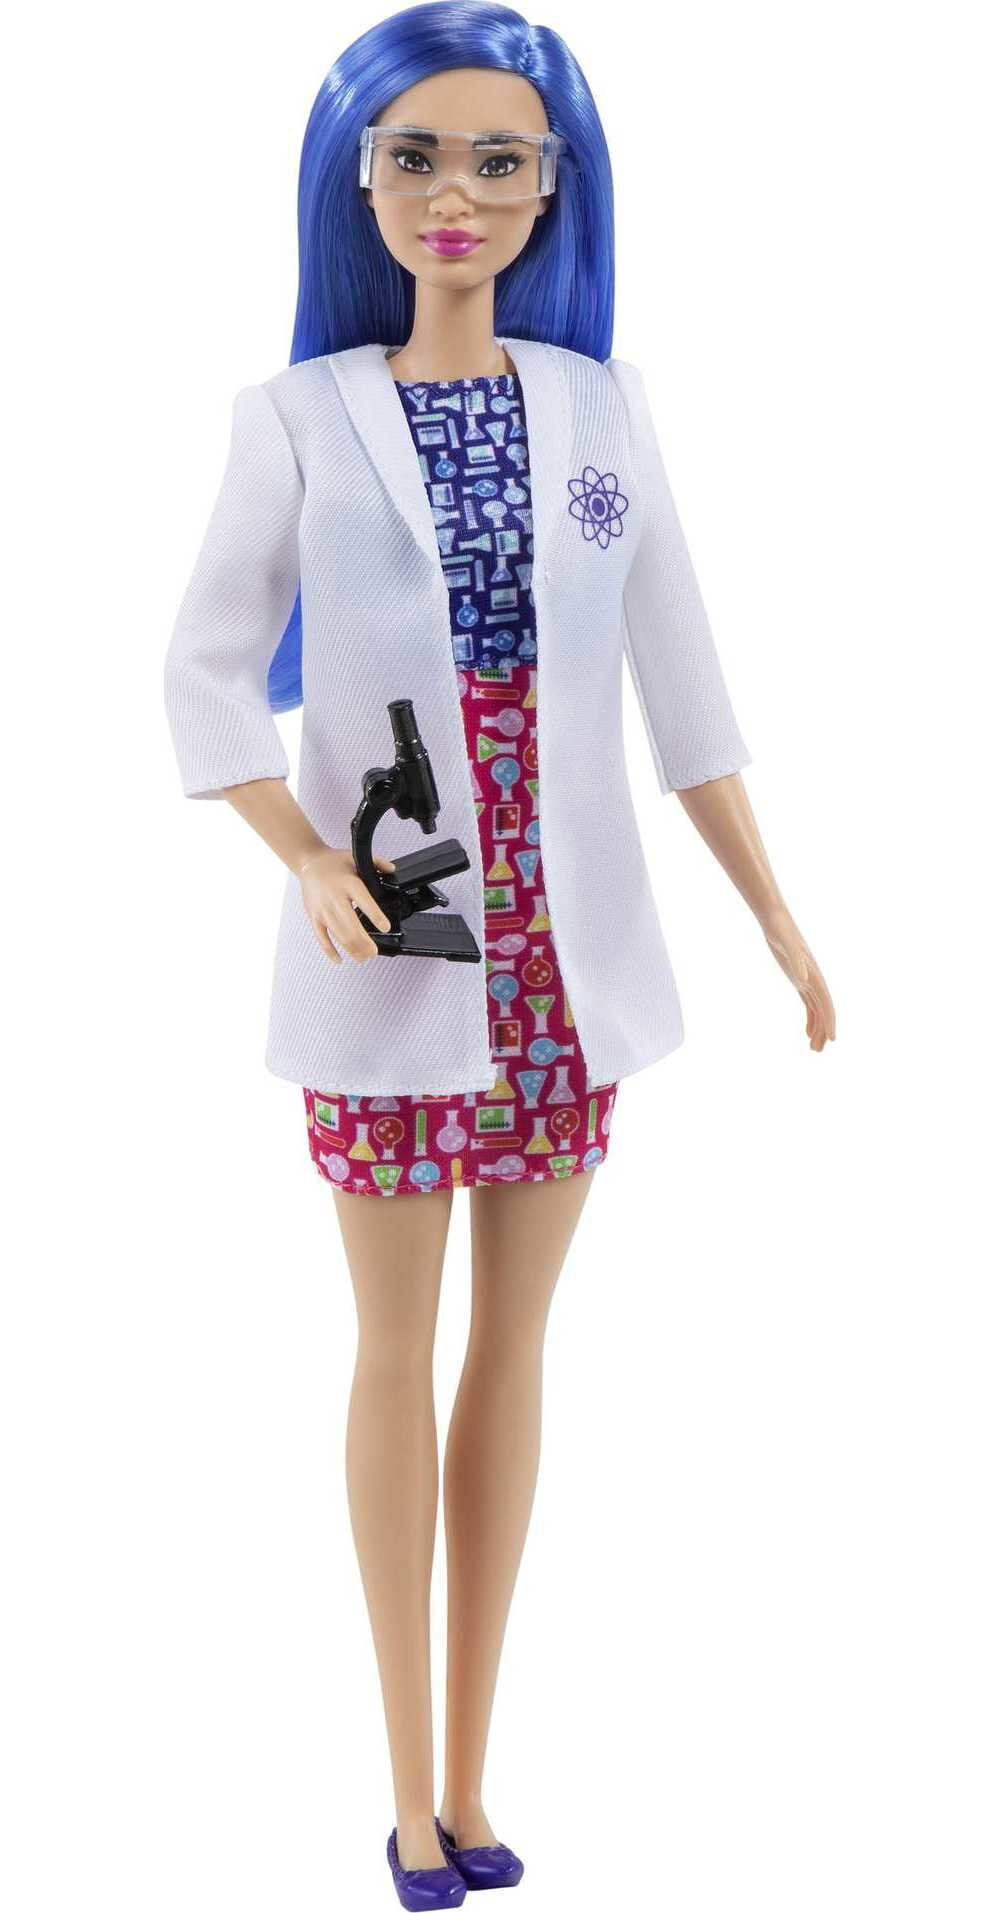 Barbie Career Dolls Chef Dress Up Collectable Doll 